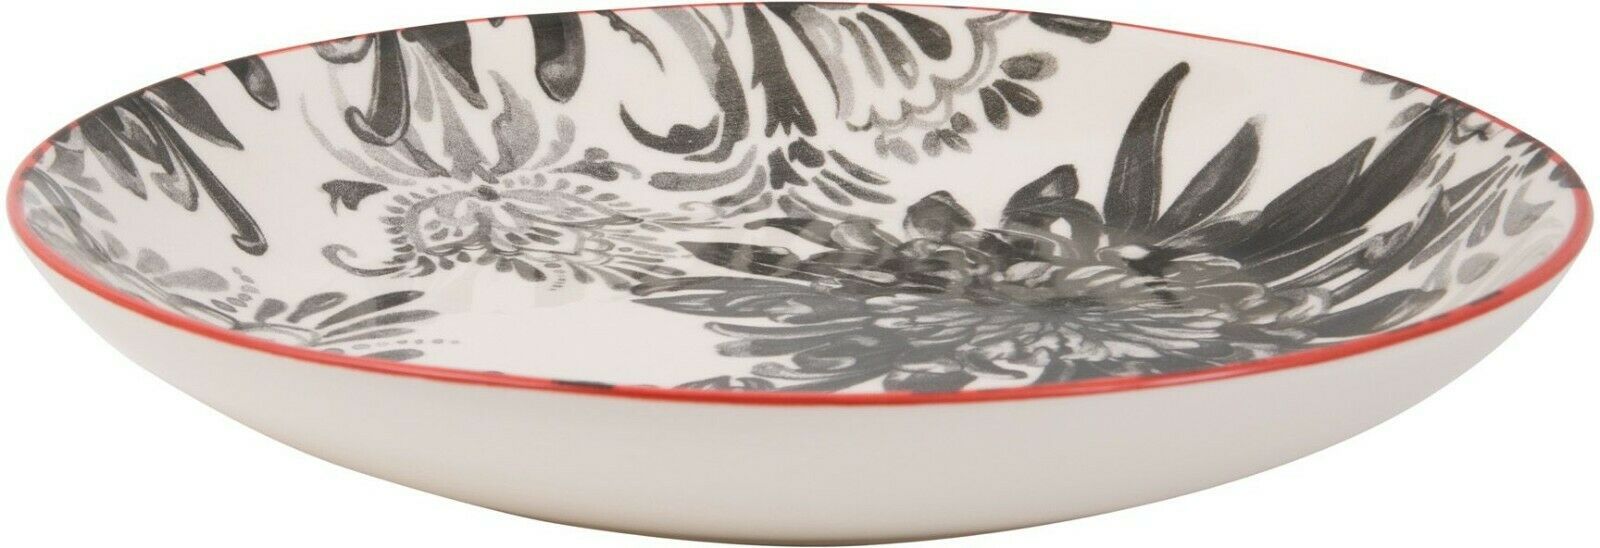 9.5"D BLACK AND WHITE LARGE FLOWER DESIGN ROUND PASTA SET 6 MADE IN PORTUGAL - $73.95